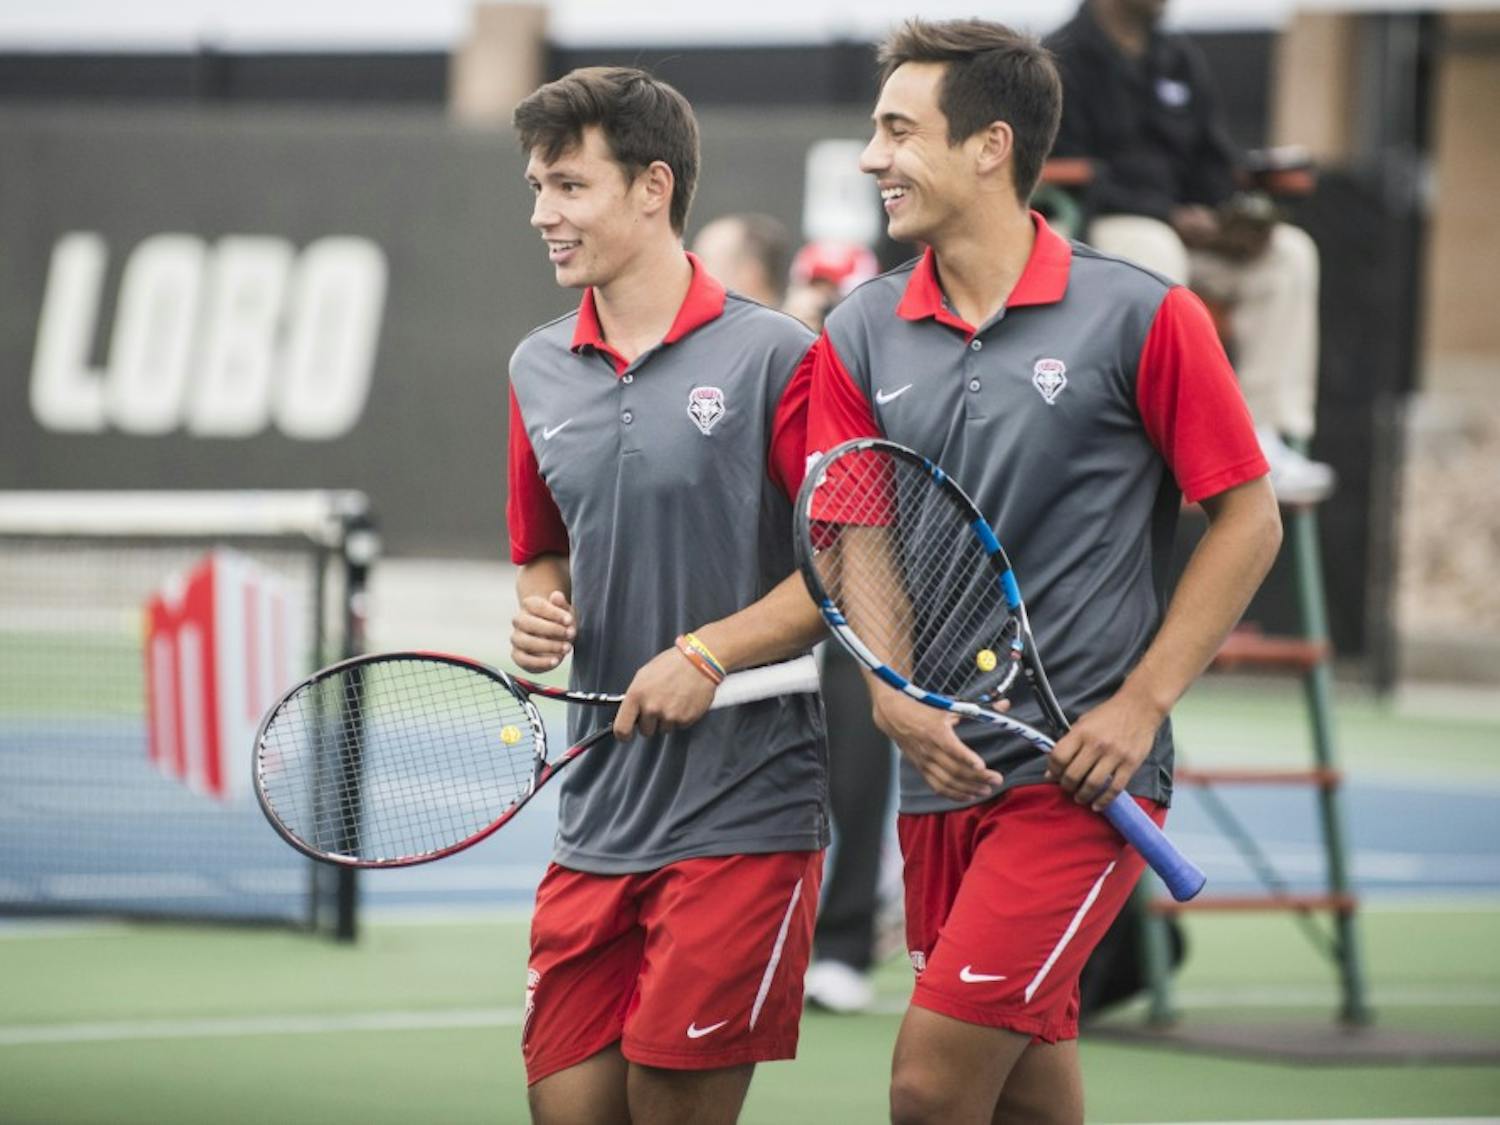 Freshman Ricky Hernandez-Tong, left, and sophomore Jorge Escutia laugh as they walk off the court after a doubles match on Sunday April 17, 2016. The Lobos will play Denver University this Sunday at 2 p.m.